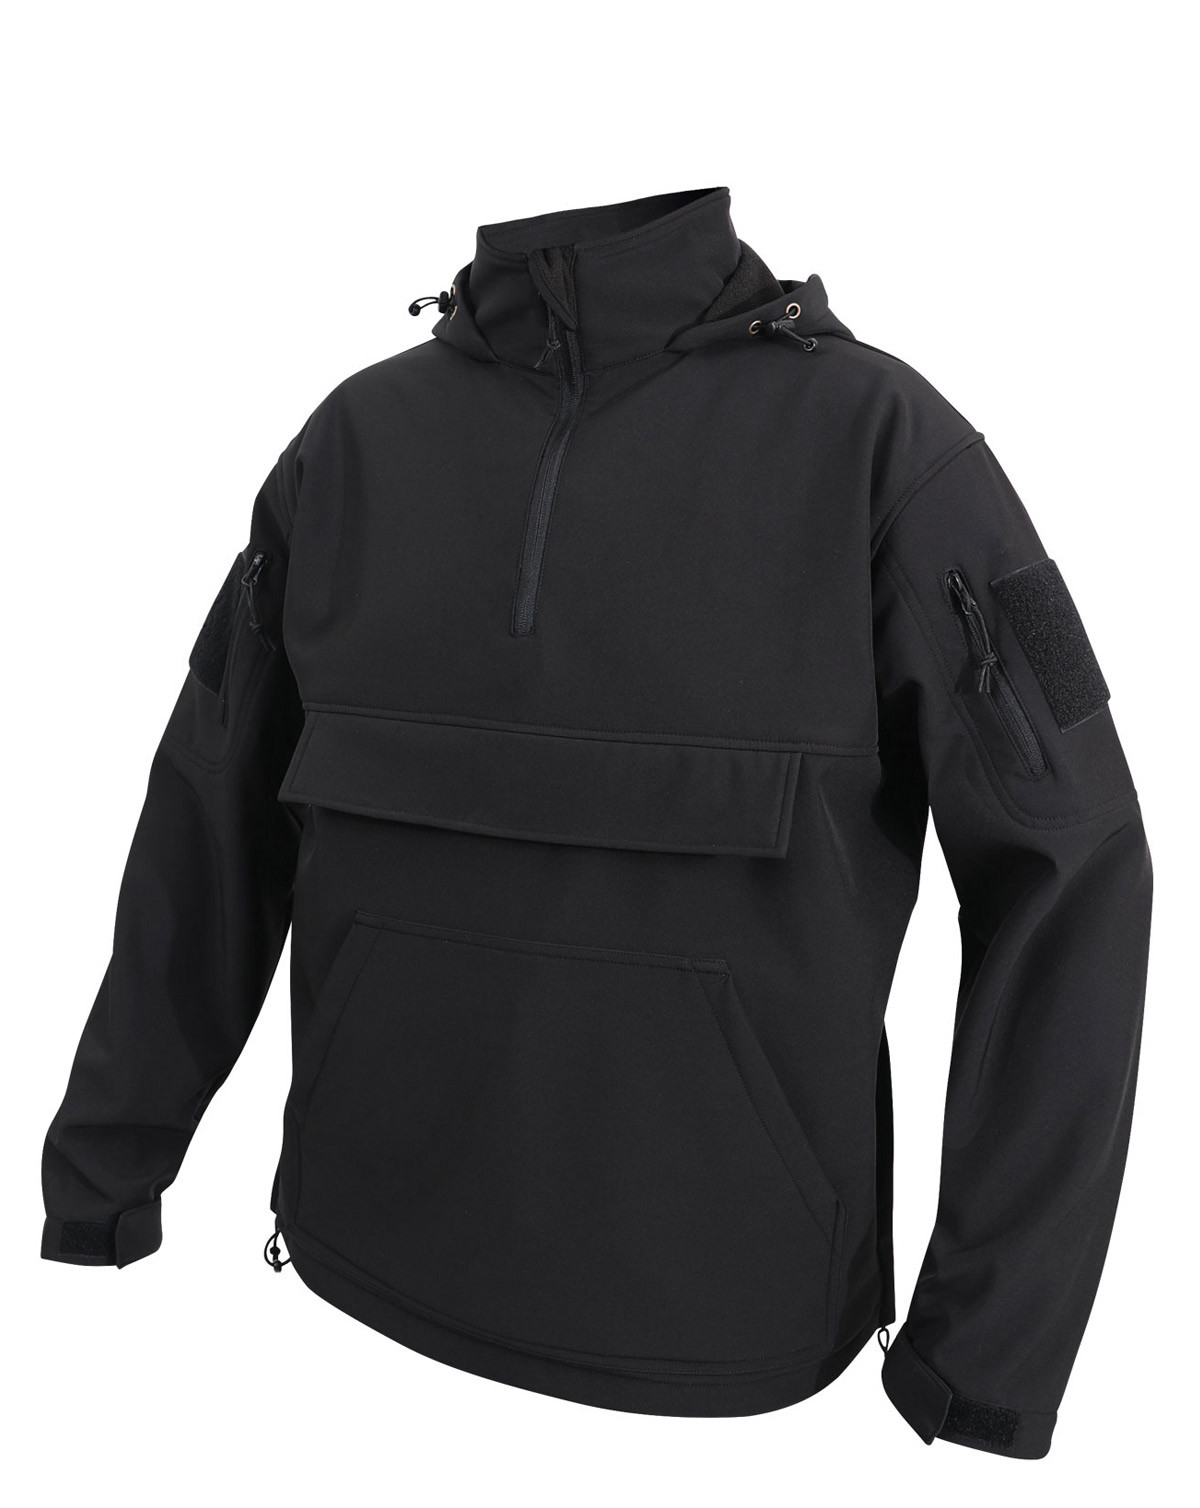 #3 - Rothco Concealed Carry Soft Shell Anorak (Sort, XL)